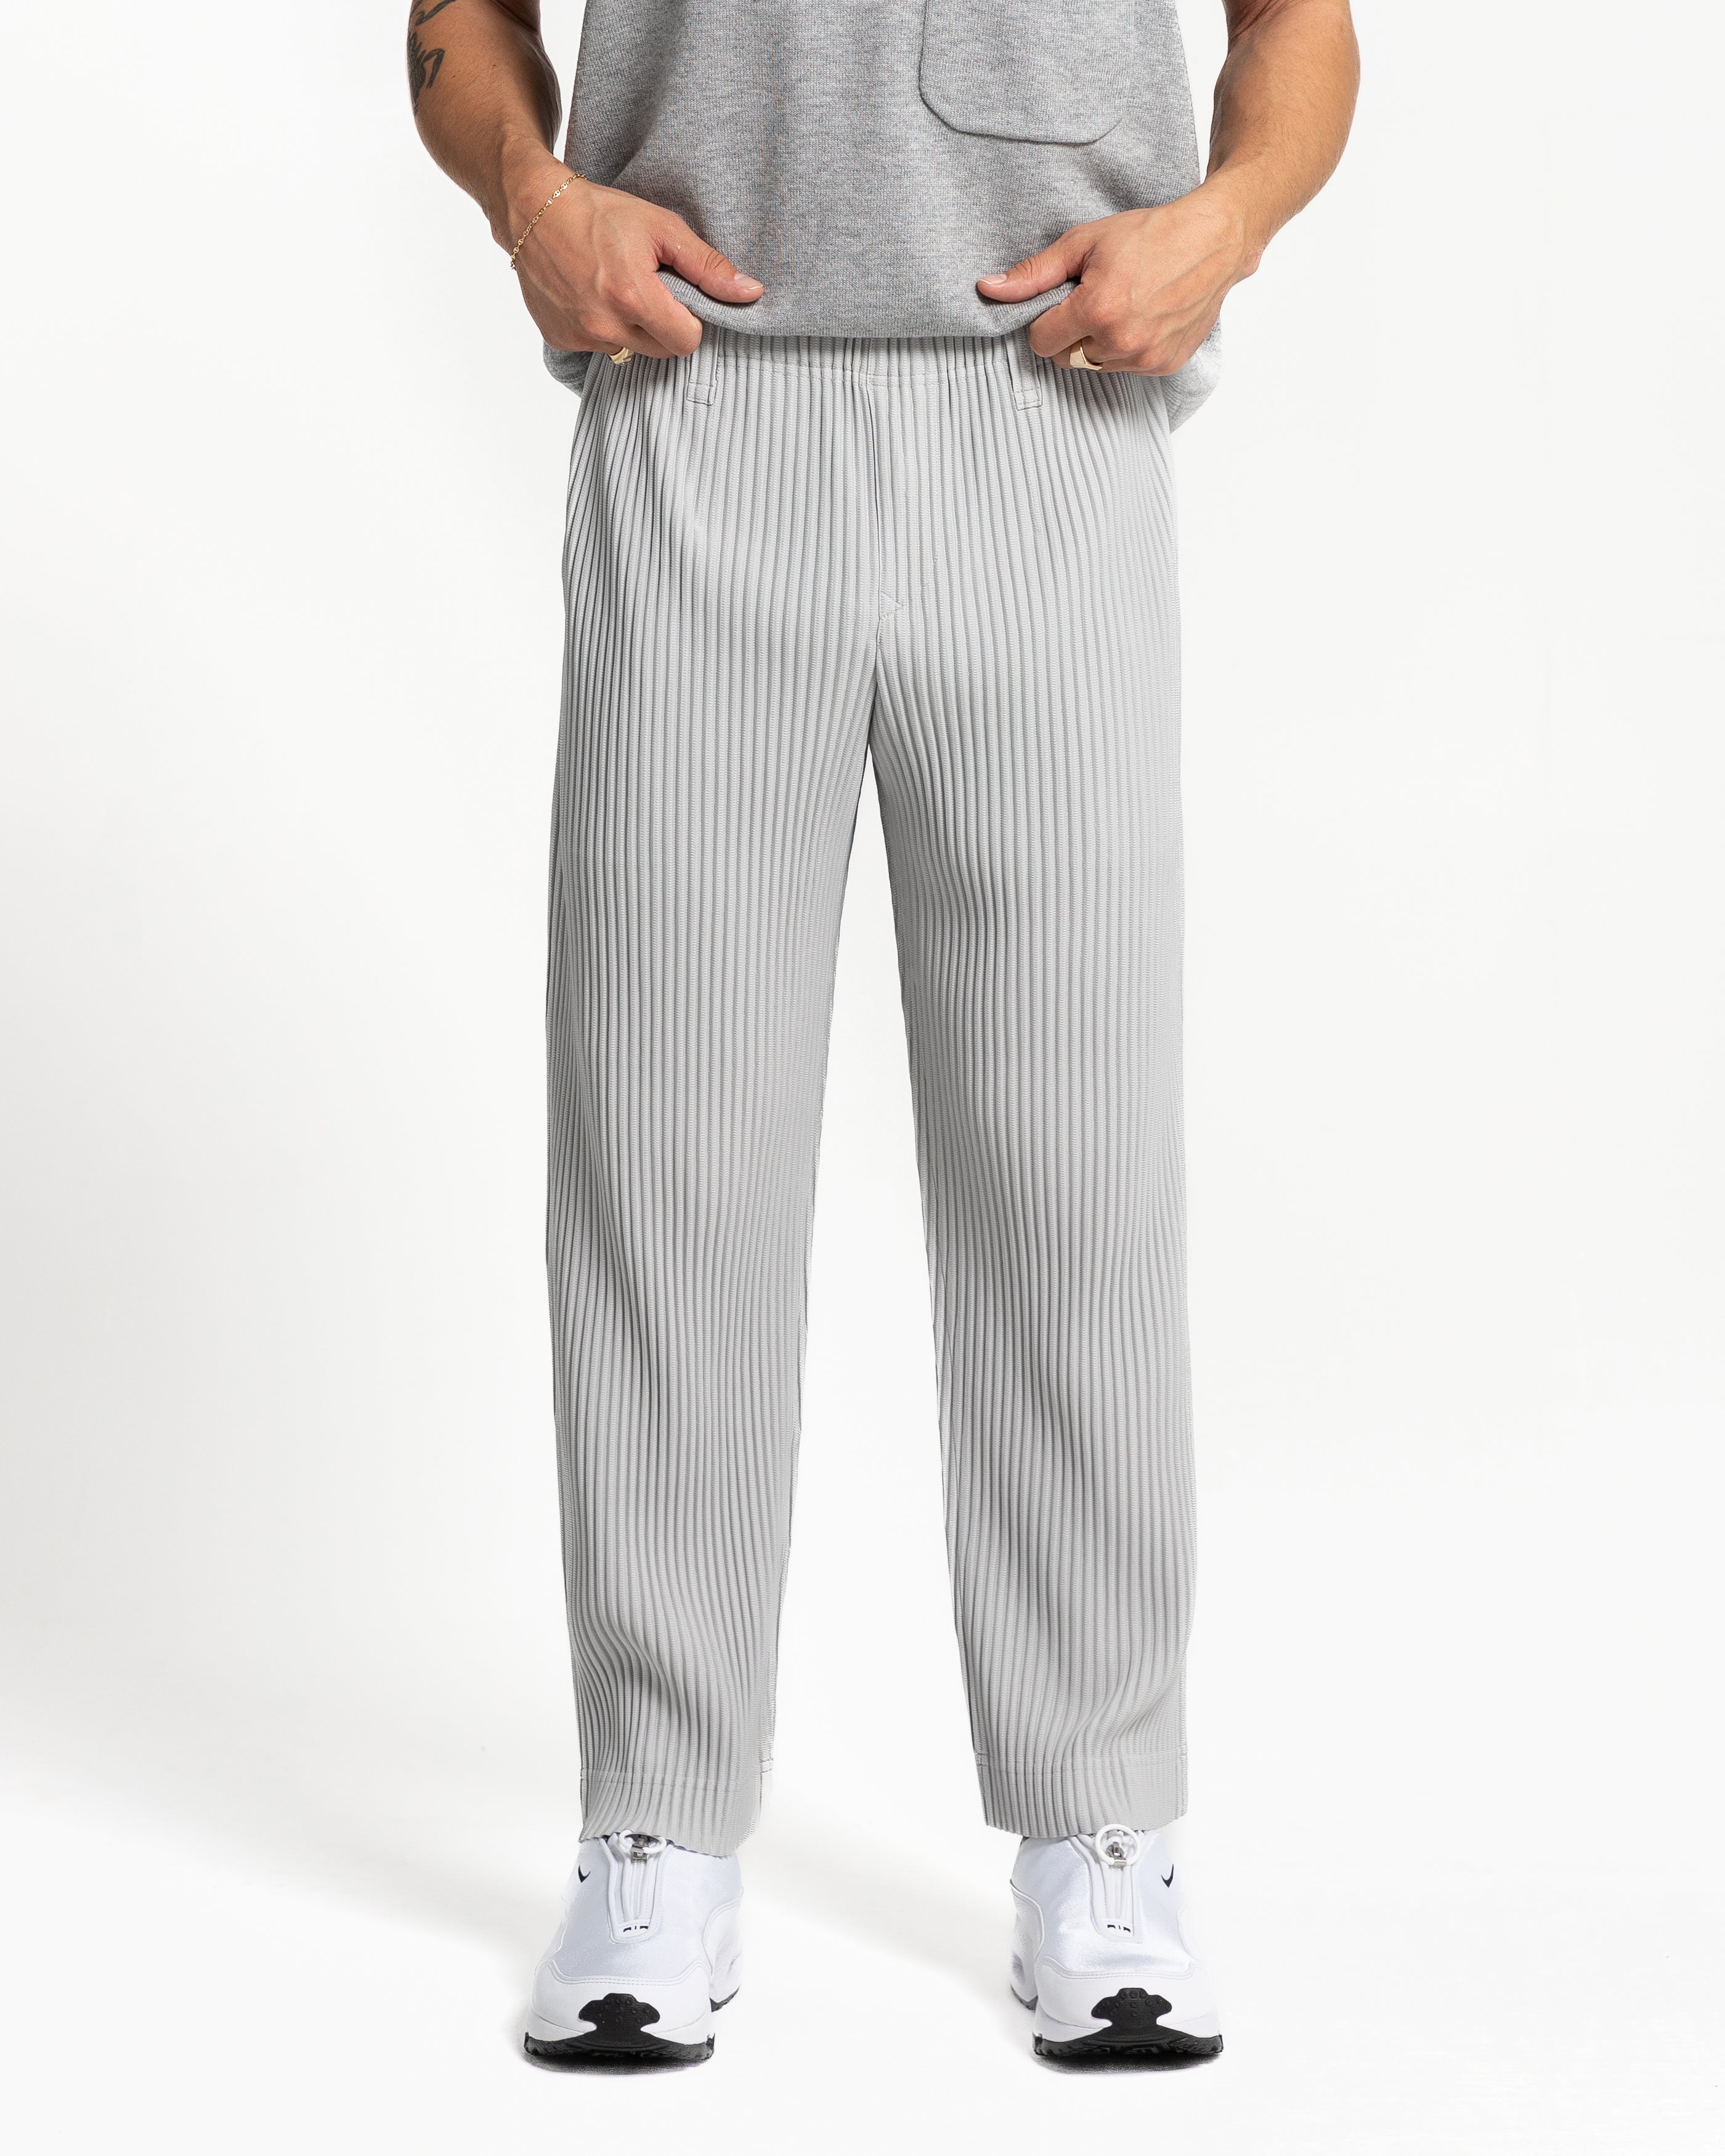 Men's Homme Plissé Issey Miyake Cotton Pants - up to −60% | Stylight